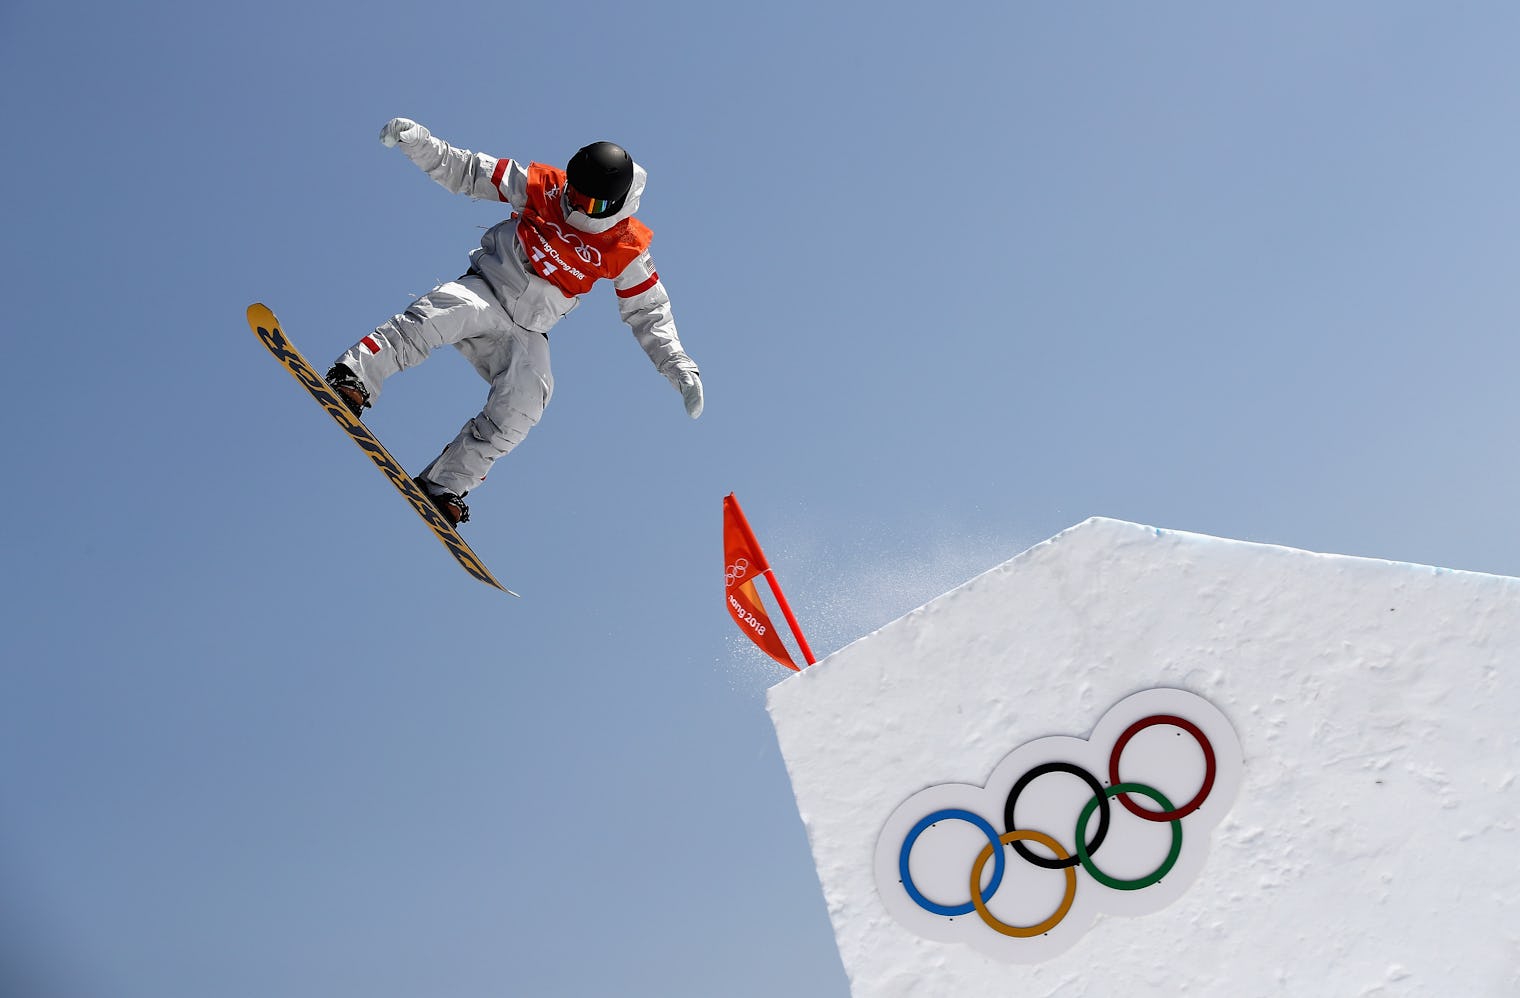 When Is Olympics Snowboarding On NBC? This Schedule Is A Must Have For